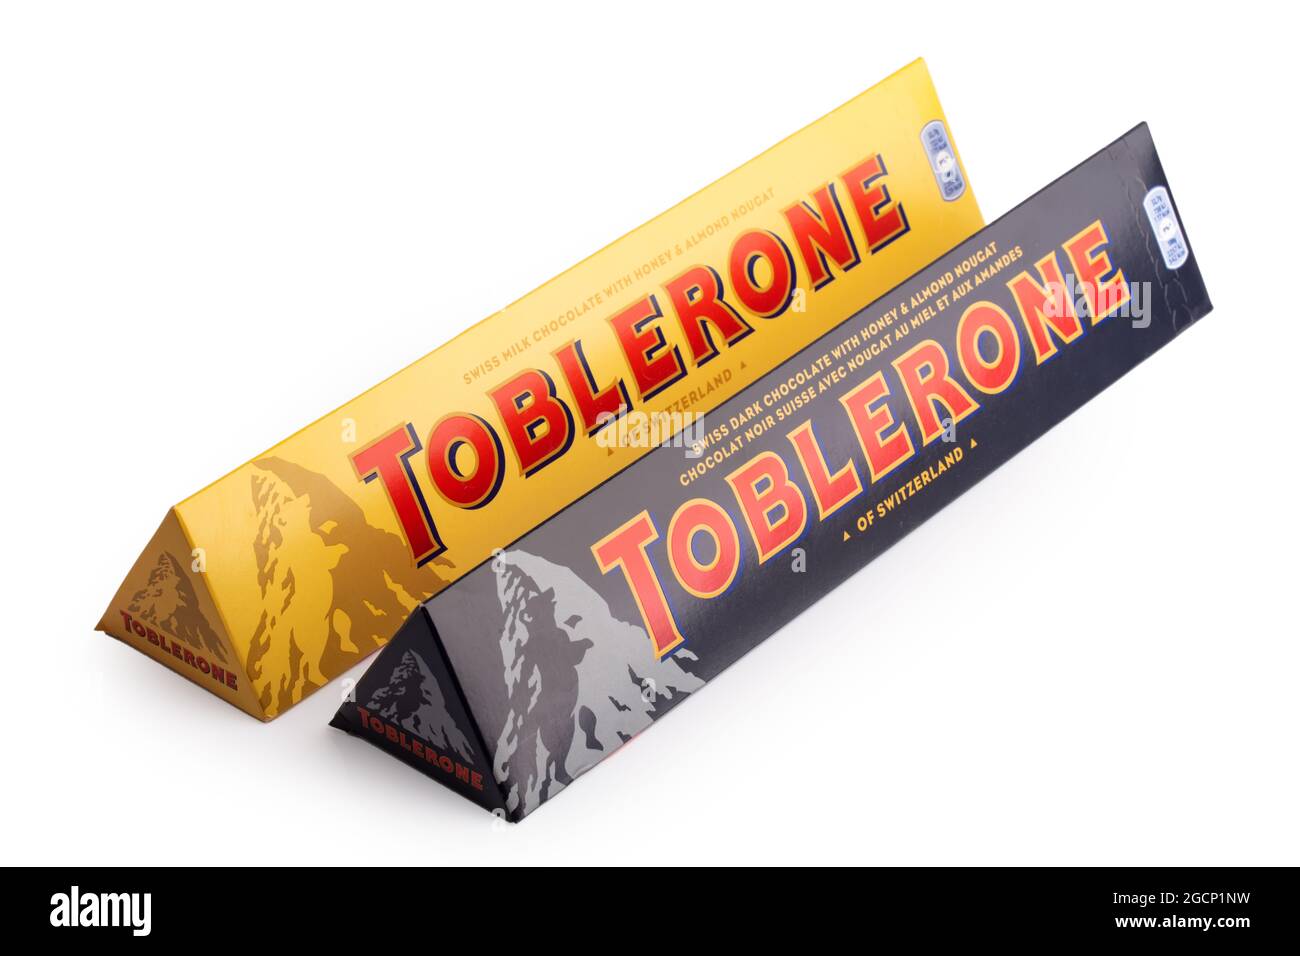 https://c8.alamy.com/comp/2GCP1NW/huettenberg-germany-2021-august-05-toblerone-bars-swiss-milk-chocolate-with-honey-and-almond-nougat-of-switzerland-on-white-background-2GCP1NW.jpg